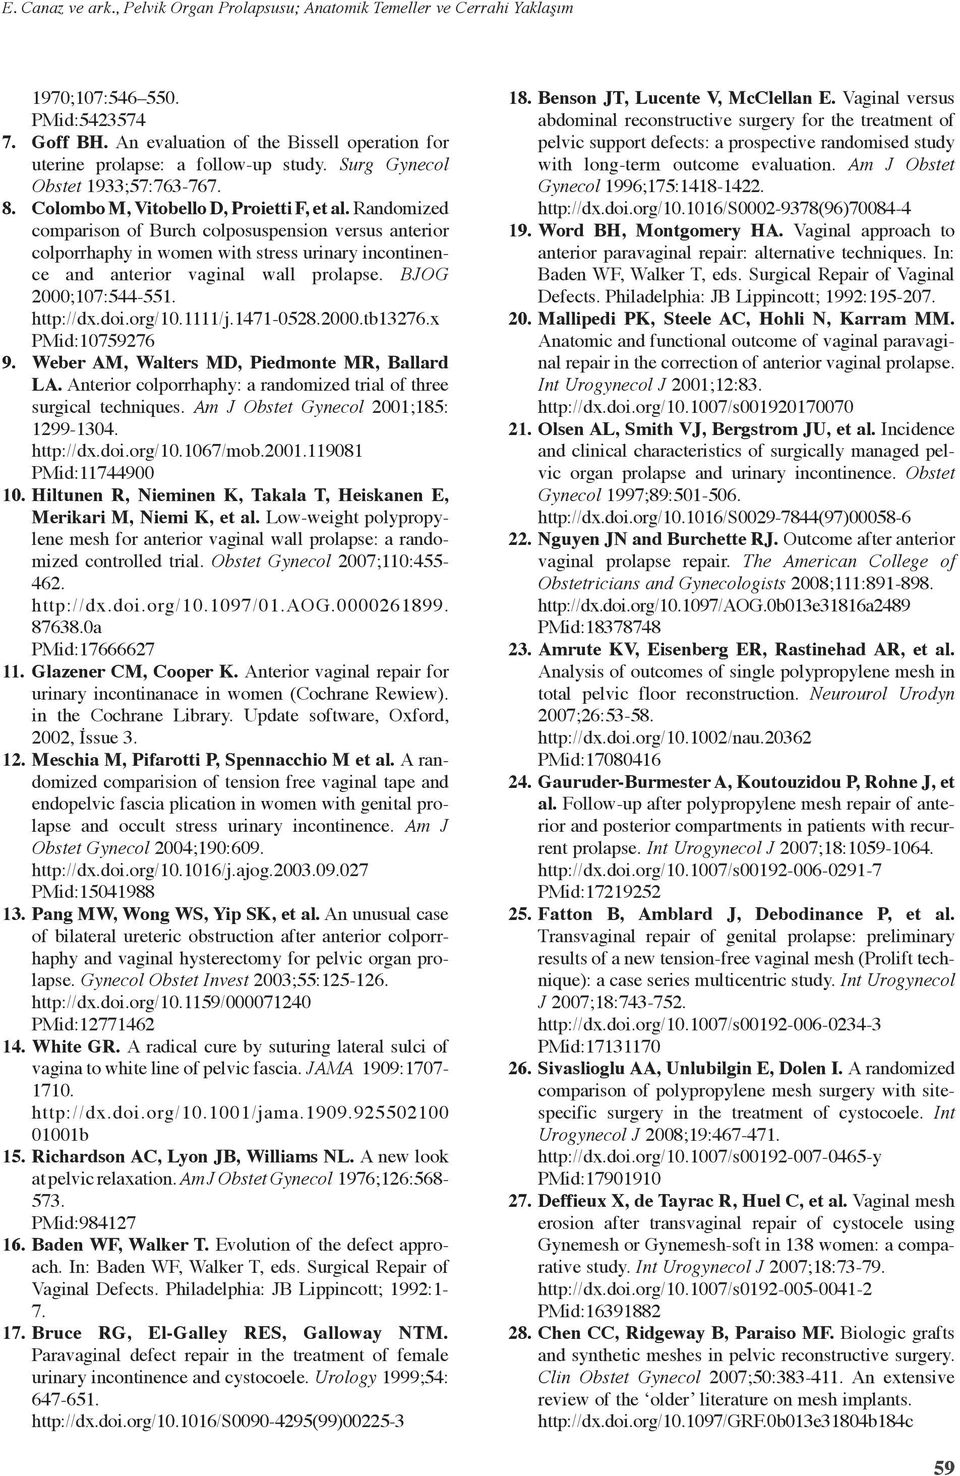 Randomized comparison of Burch colposuspension versus anterior colporrhaphy in women with stress urinary incontinence and anterior vaginal wall prolapse. BJOG 2000;107:544-551. http://dx.doi.org/10.